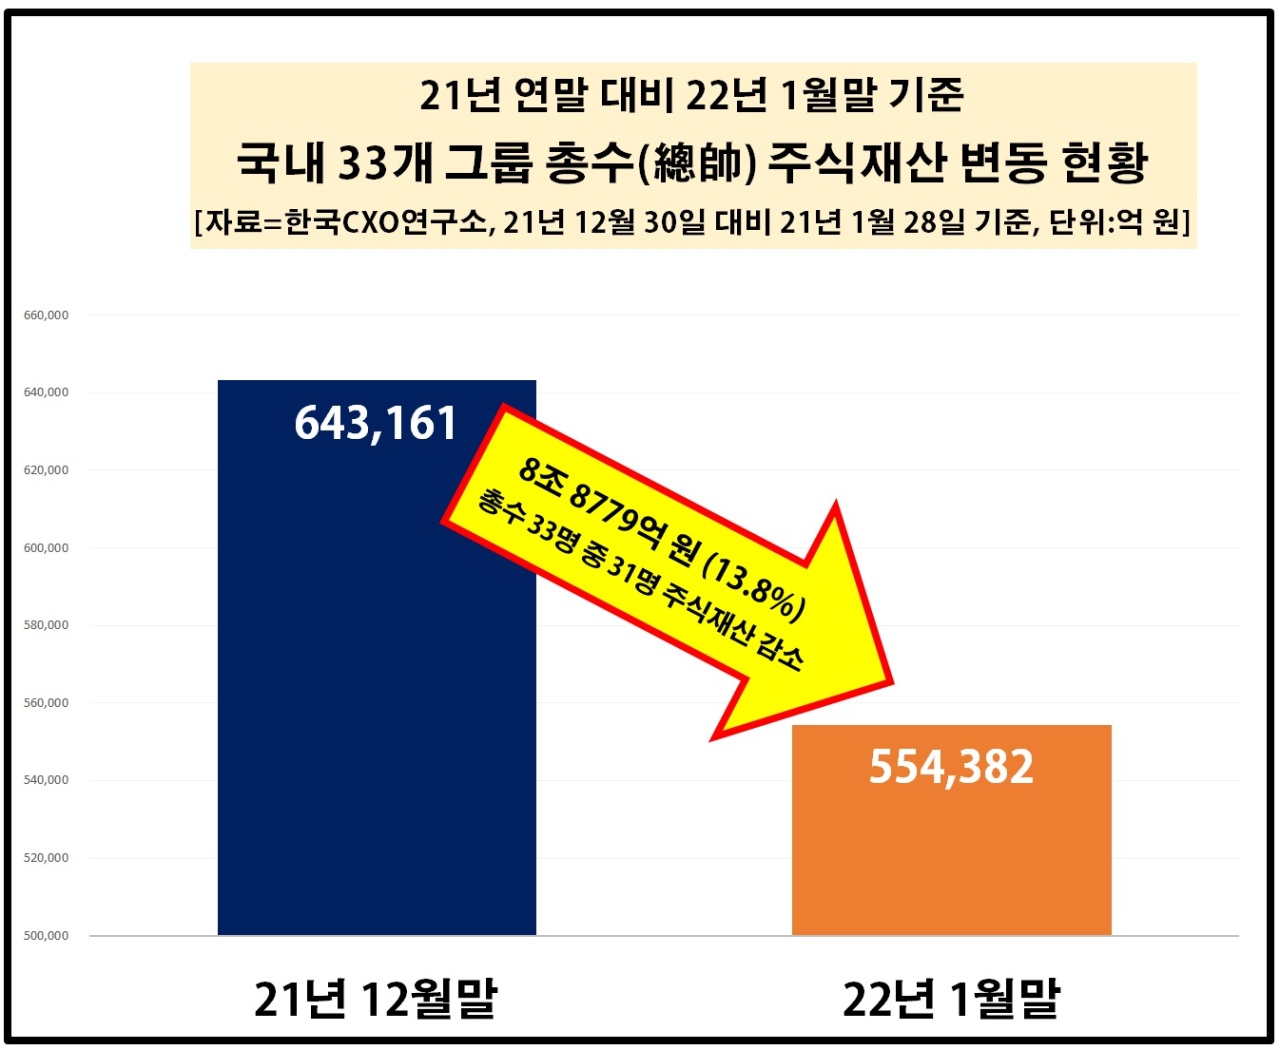 The value of stocks owned by 33 chaebol leaders have declined. (Korea CXO Institute)